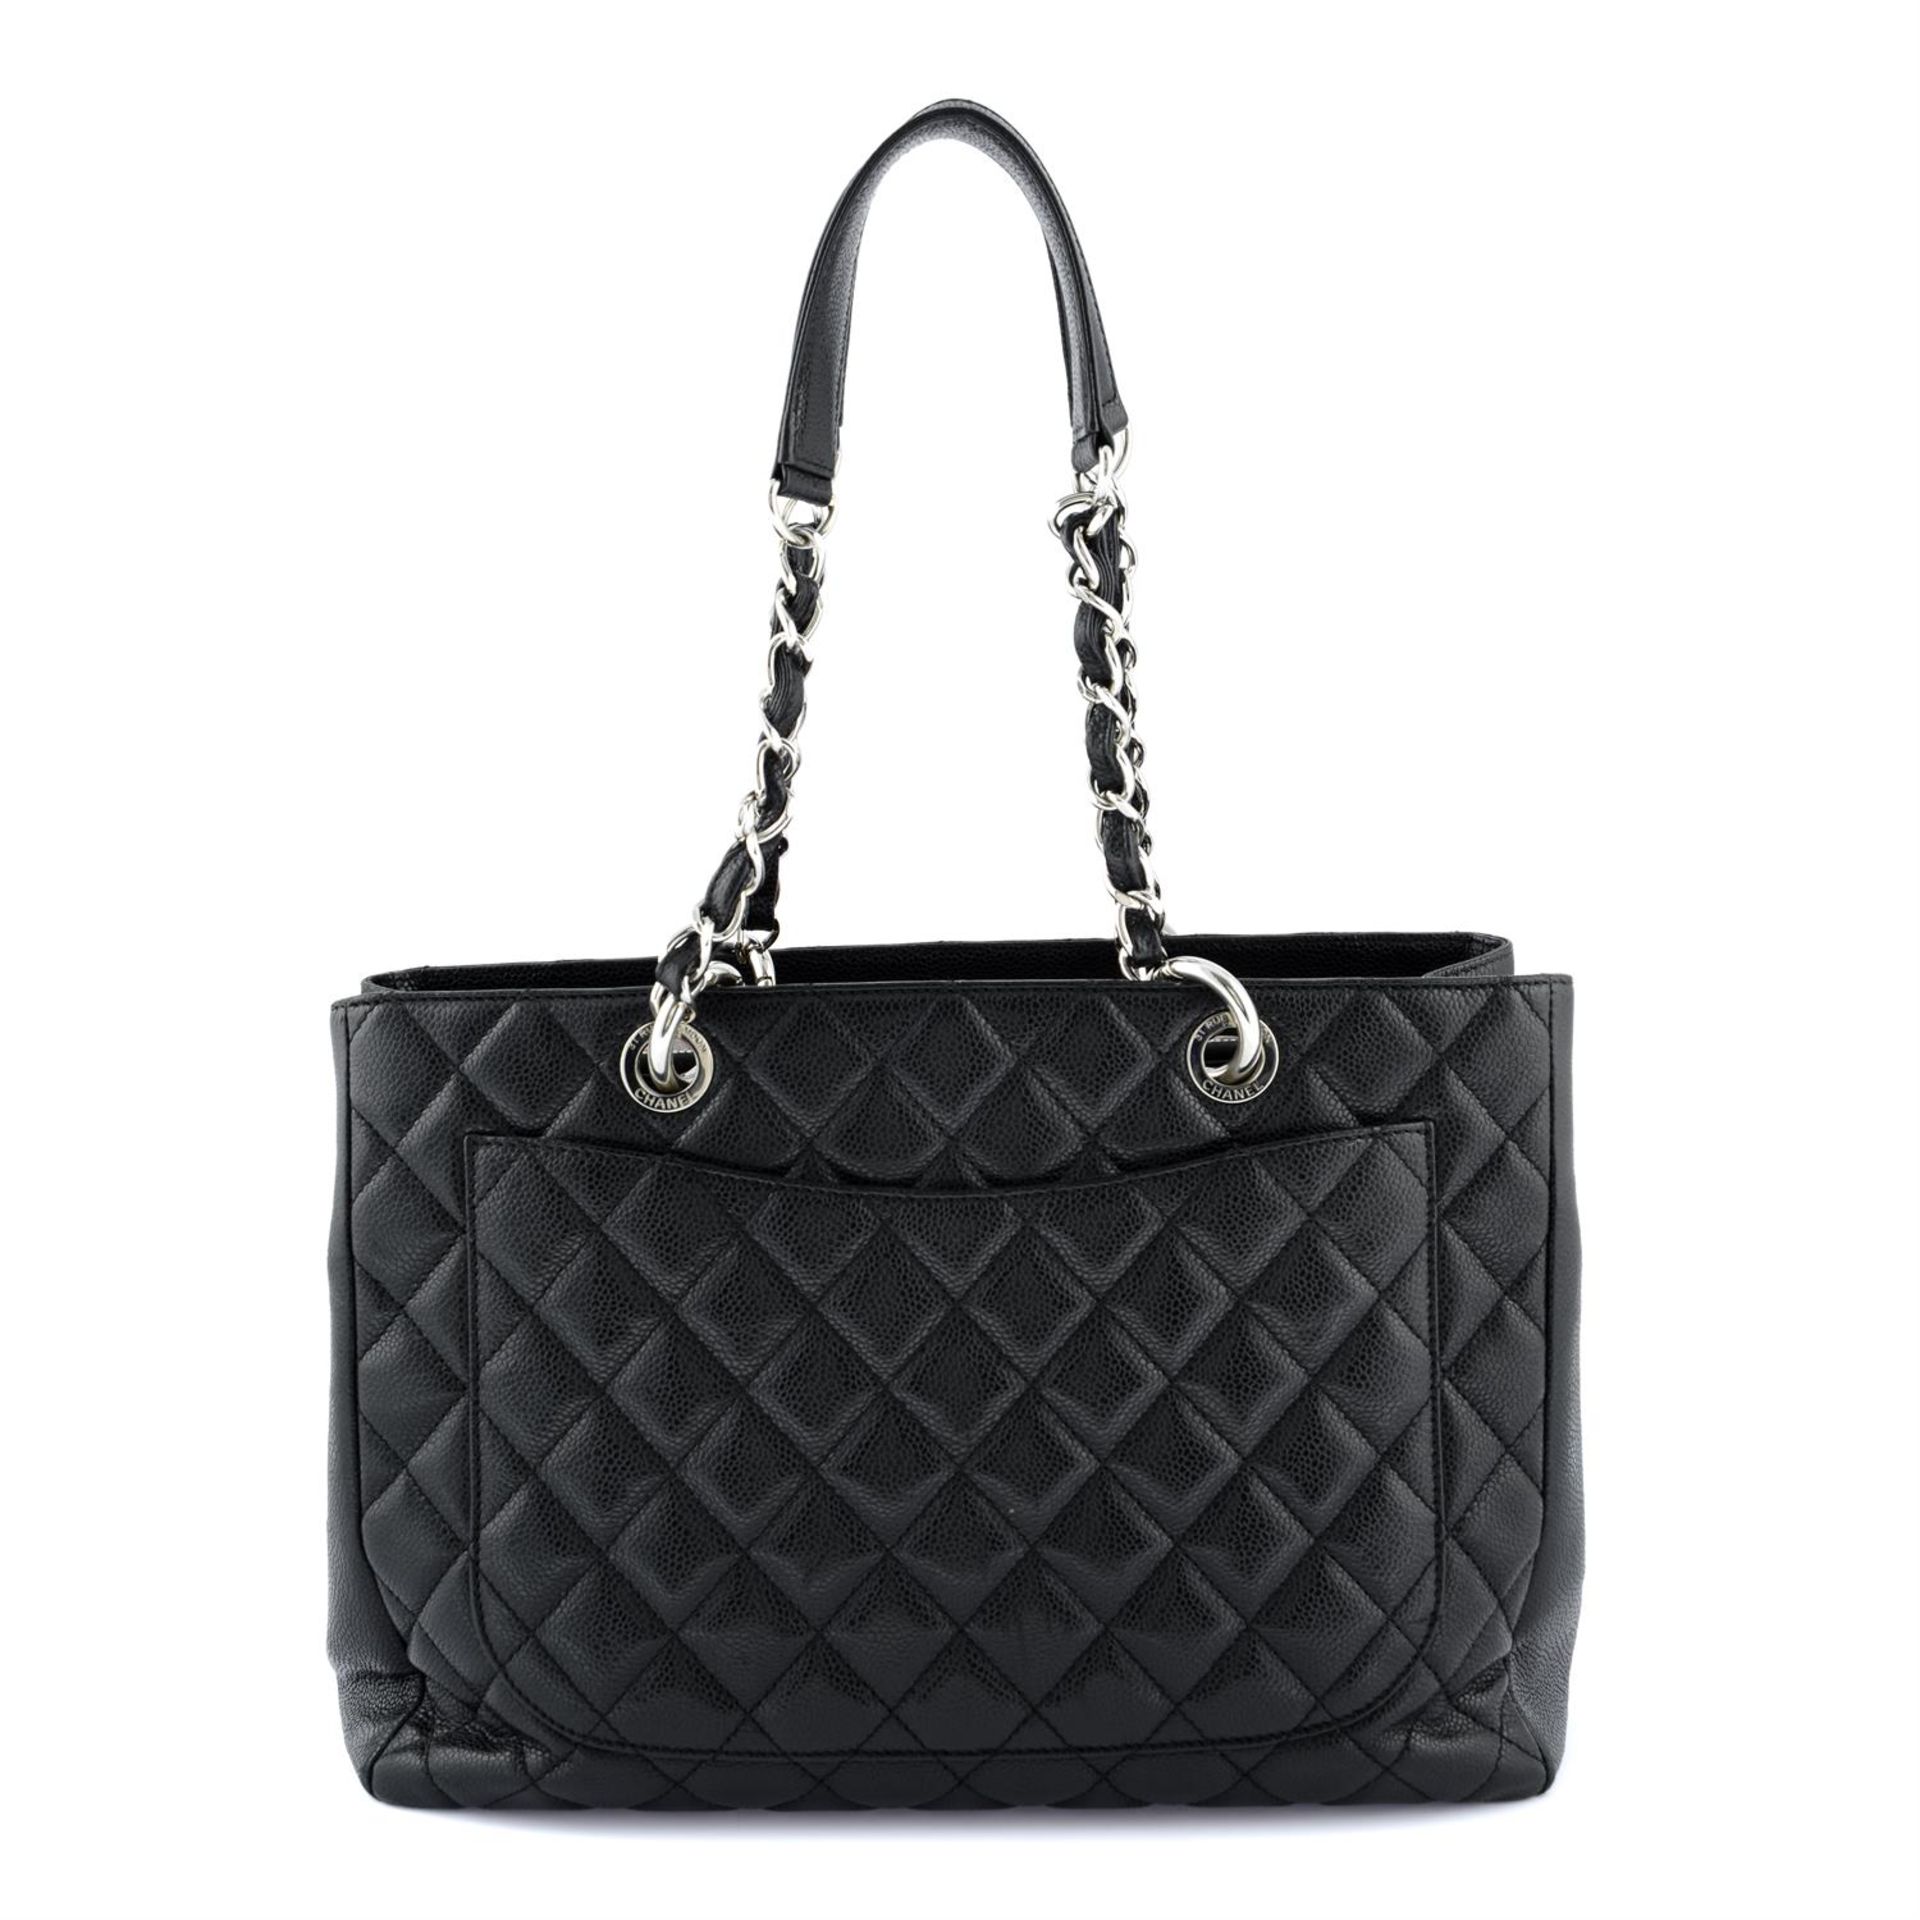 CHANEL - a black Caviar leather GST. - Image 2 of 4